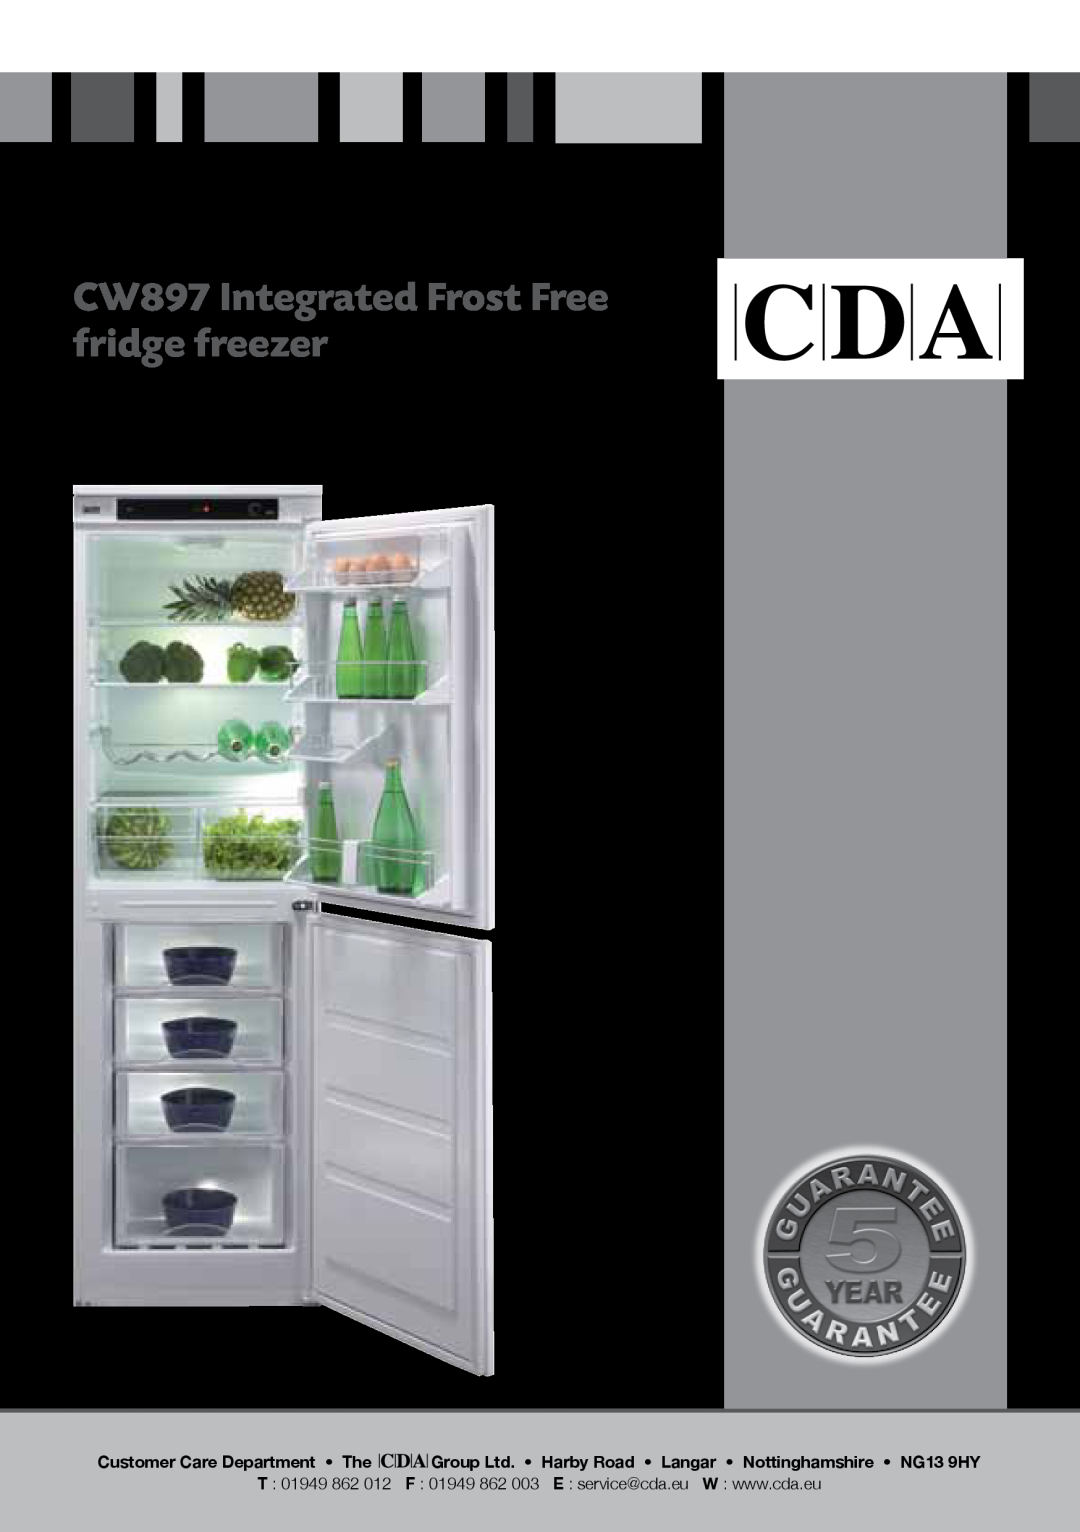 CDA manual CW897 Integrated Frost Free fridge freezer, Manual for Installation, Use and Maintenance, T 01949 